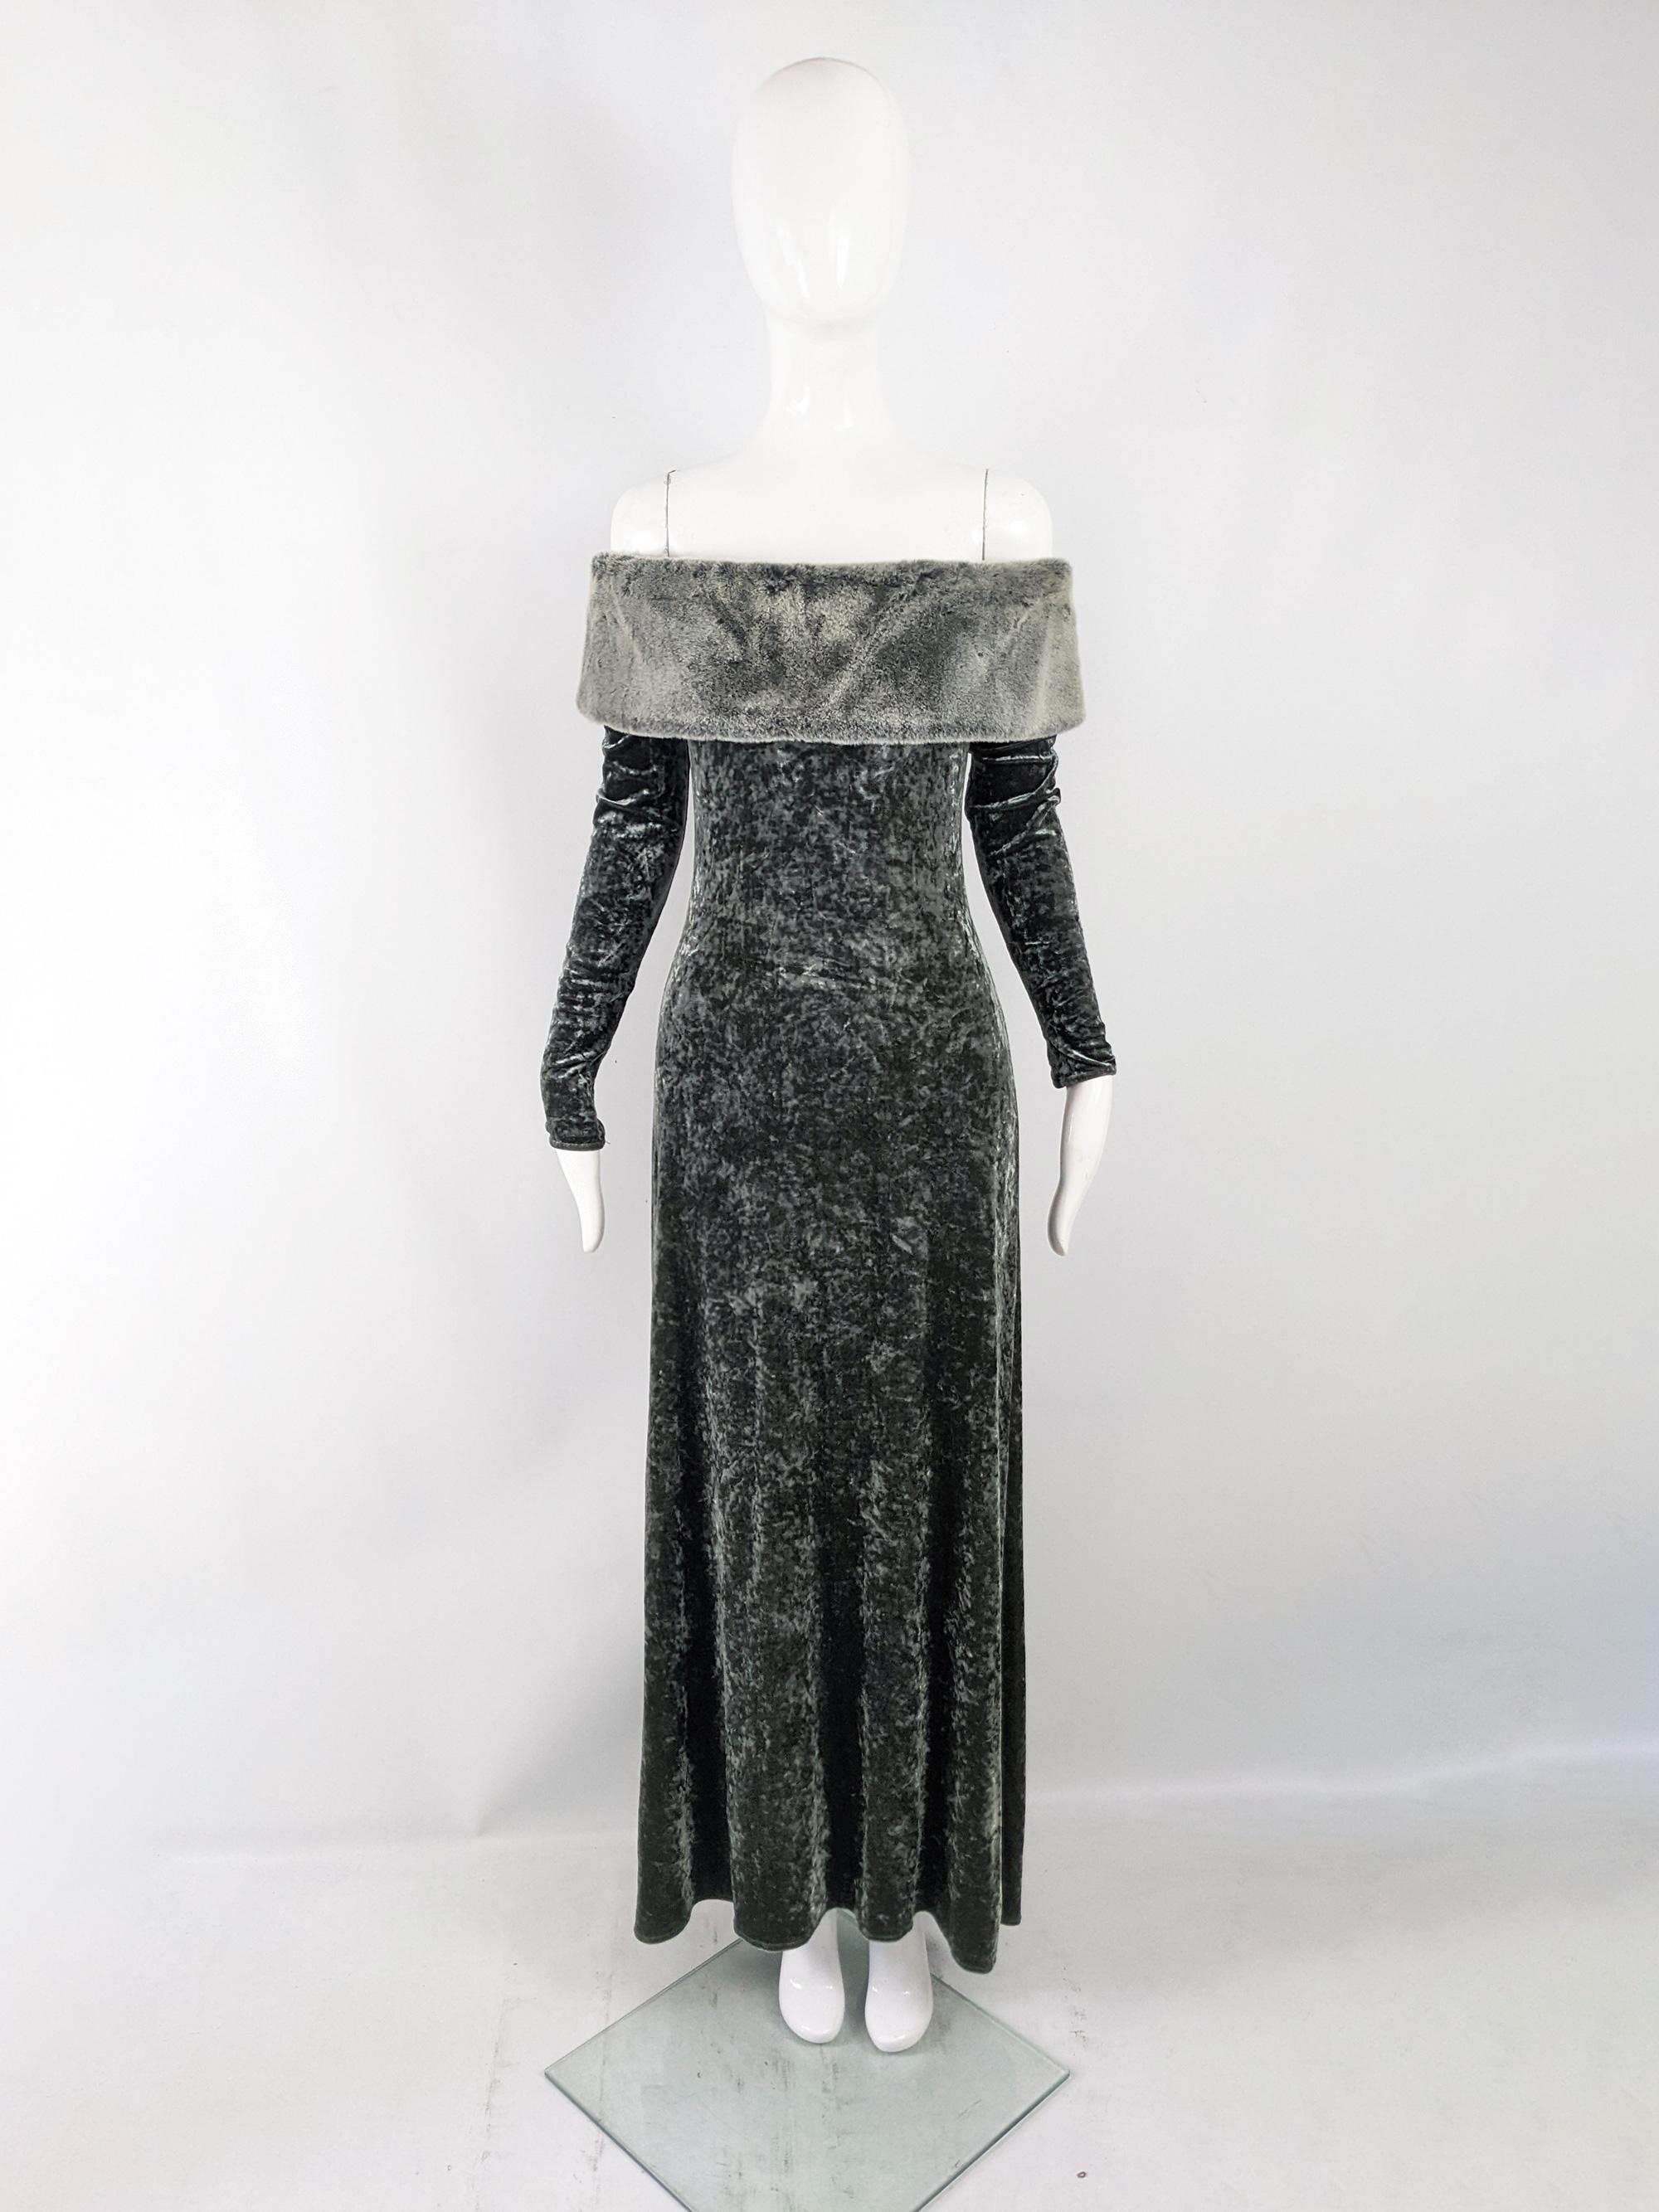 An ultra glamorous vintage womens evening gown from the 80s by luxury British department store, Harrods. In a green/ greenish-grey slinky, panne velvet / crushed velour with an incredible faux fur off the shoulder design. Perfect for a formal event